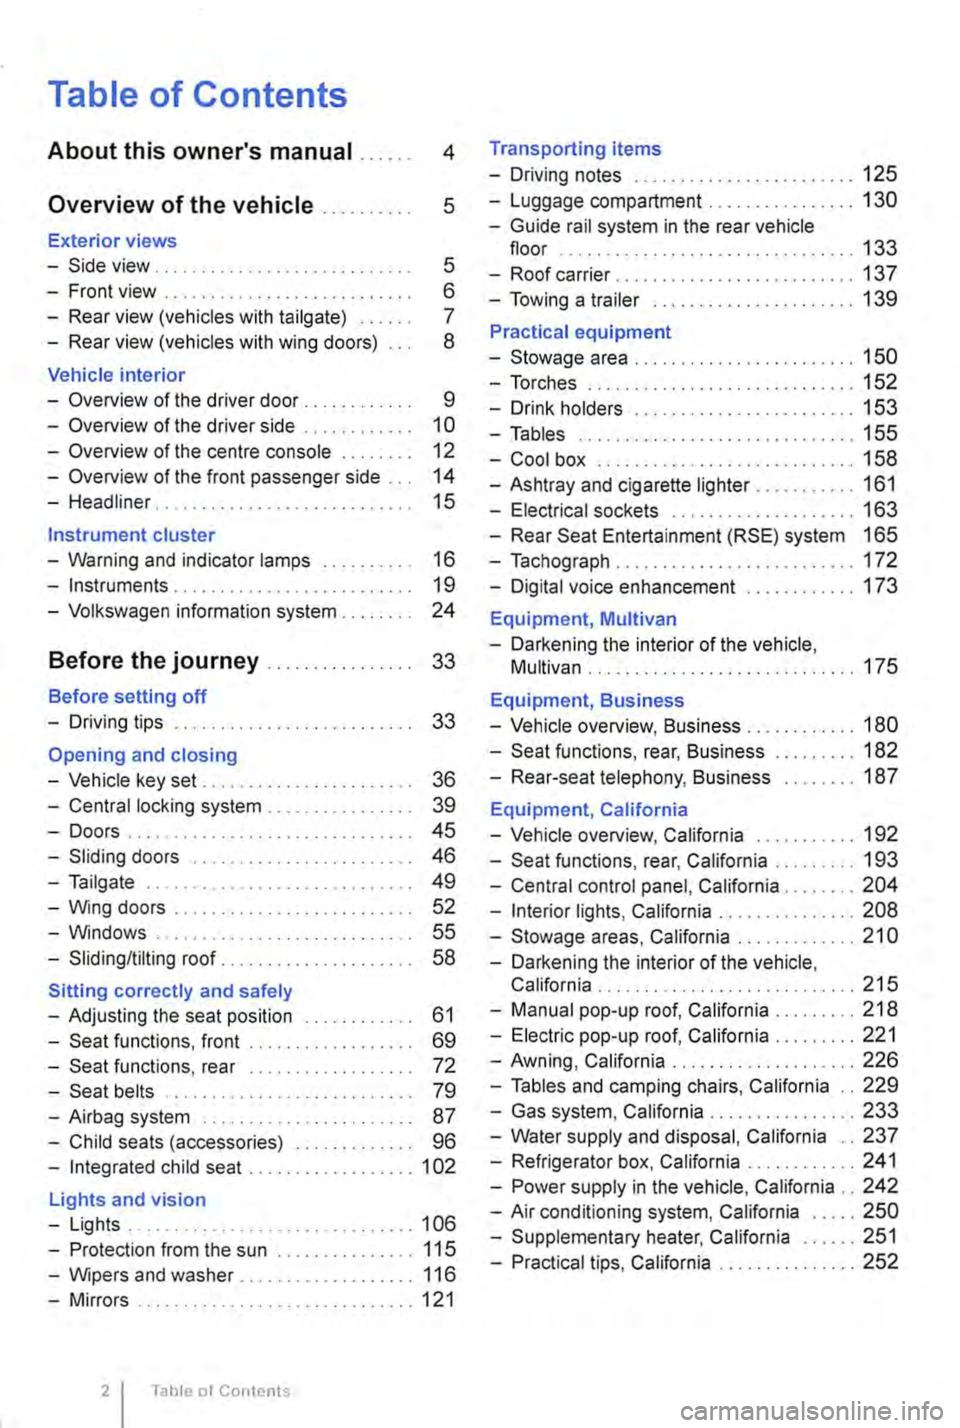 VOLKSWAGEN TRANSPORTER 2013  Owners Manual Table of Contents 
About this owners manual . . . . . . 4 
Overview of the vehicle . . . . . . . . . . 5 
Exterior views 
-Side view . . . . . . . . . . . . . . . . . . . . . . . . . . . . 5 
-Front 